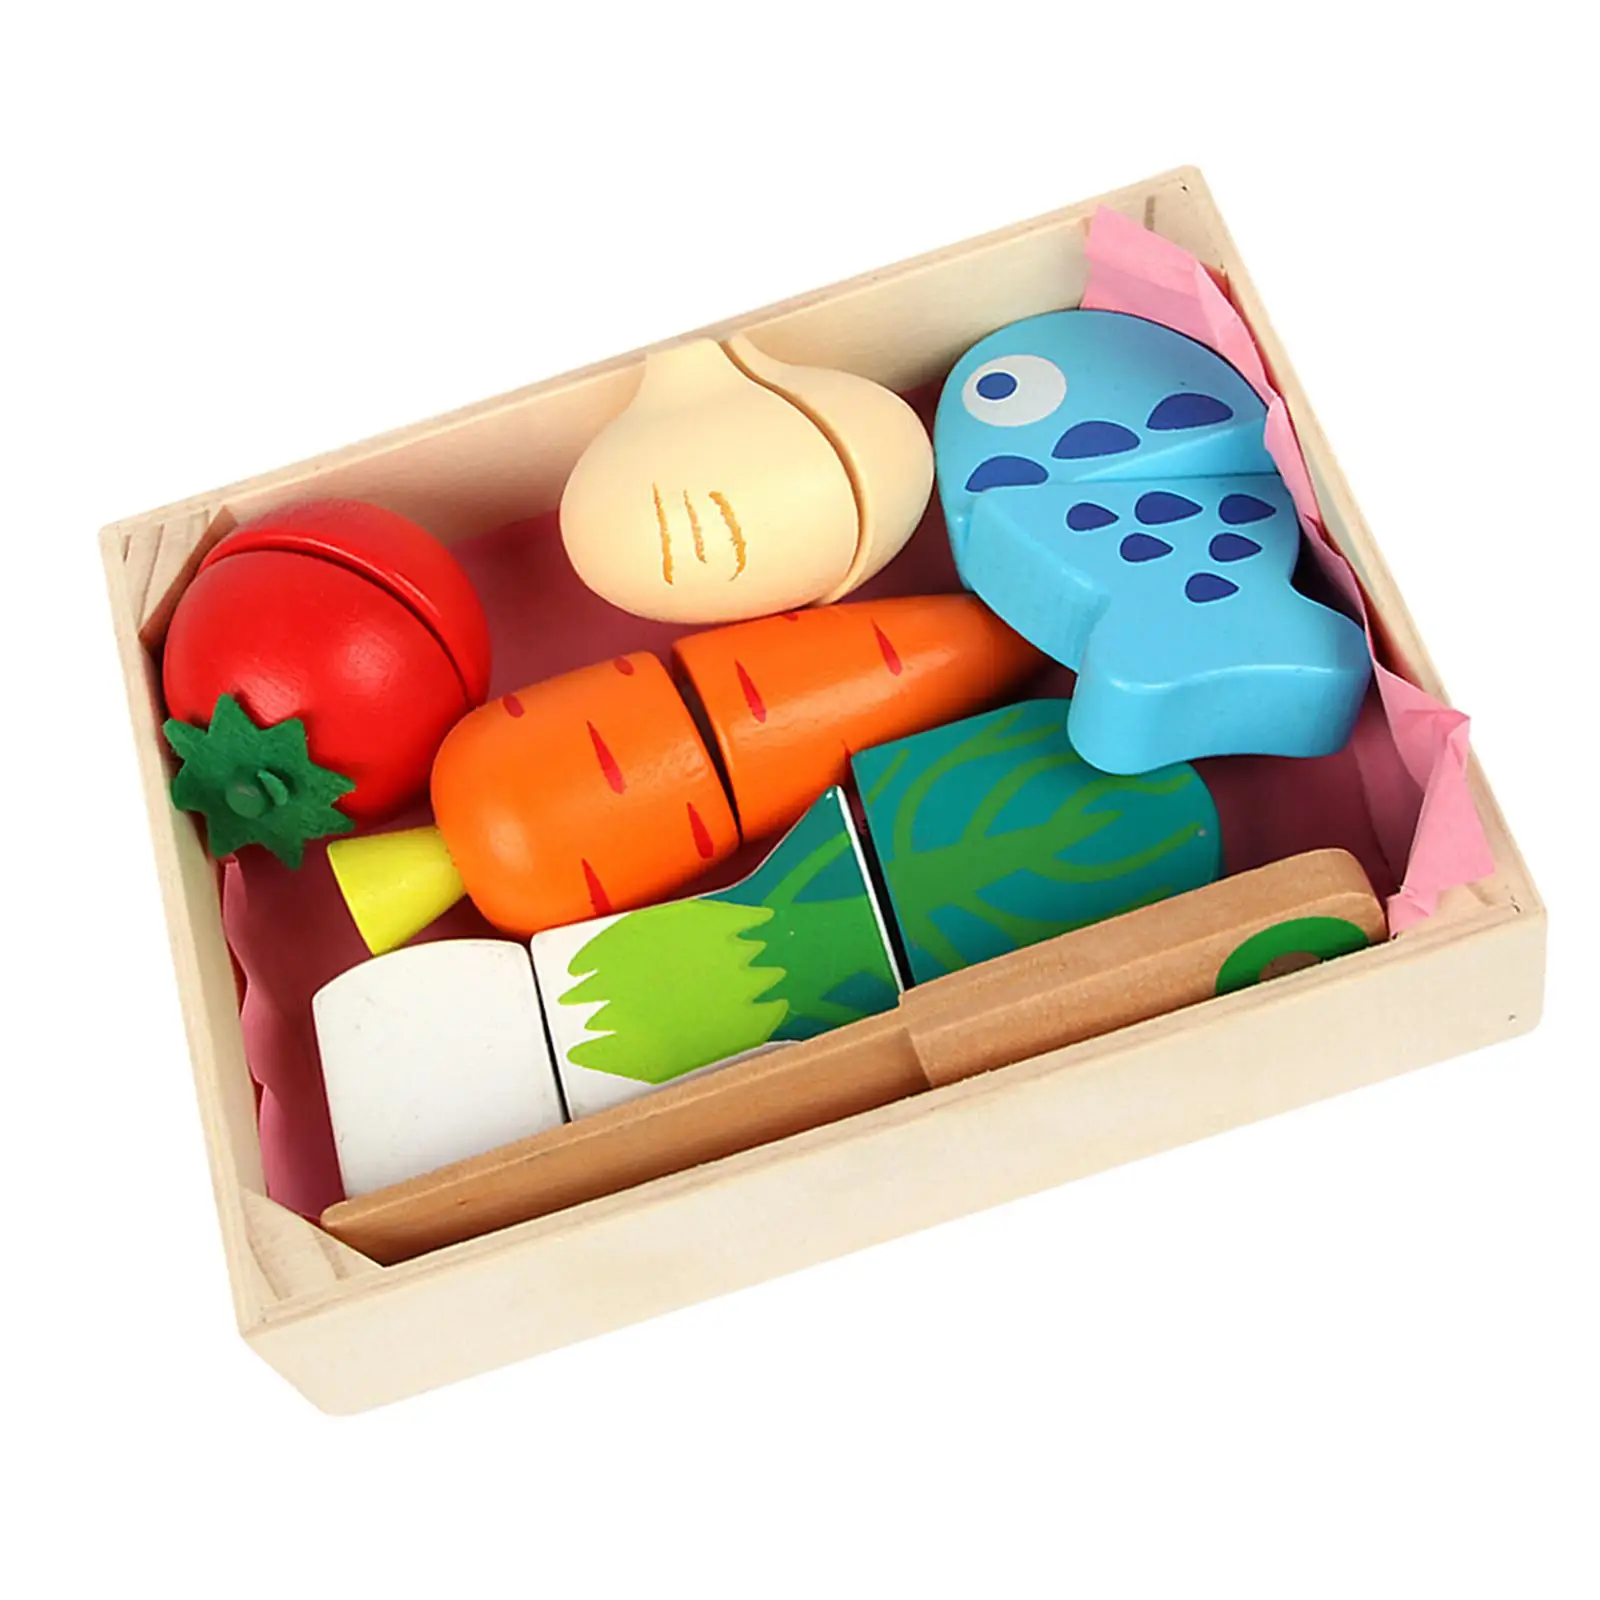 Wooden Food Kitchen Educational Toys Interactive Toys Kitchen Toys for Children Kids Preschool Toddlers Gifts